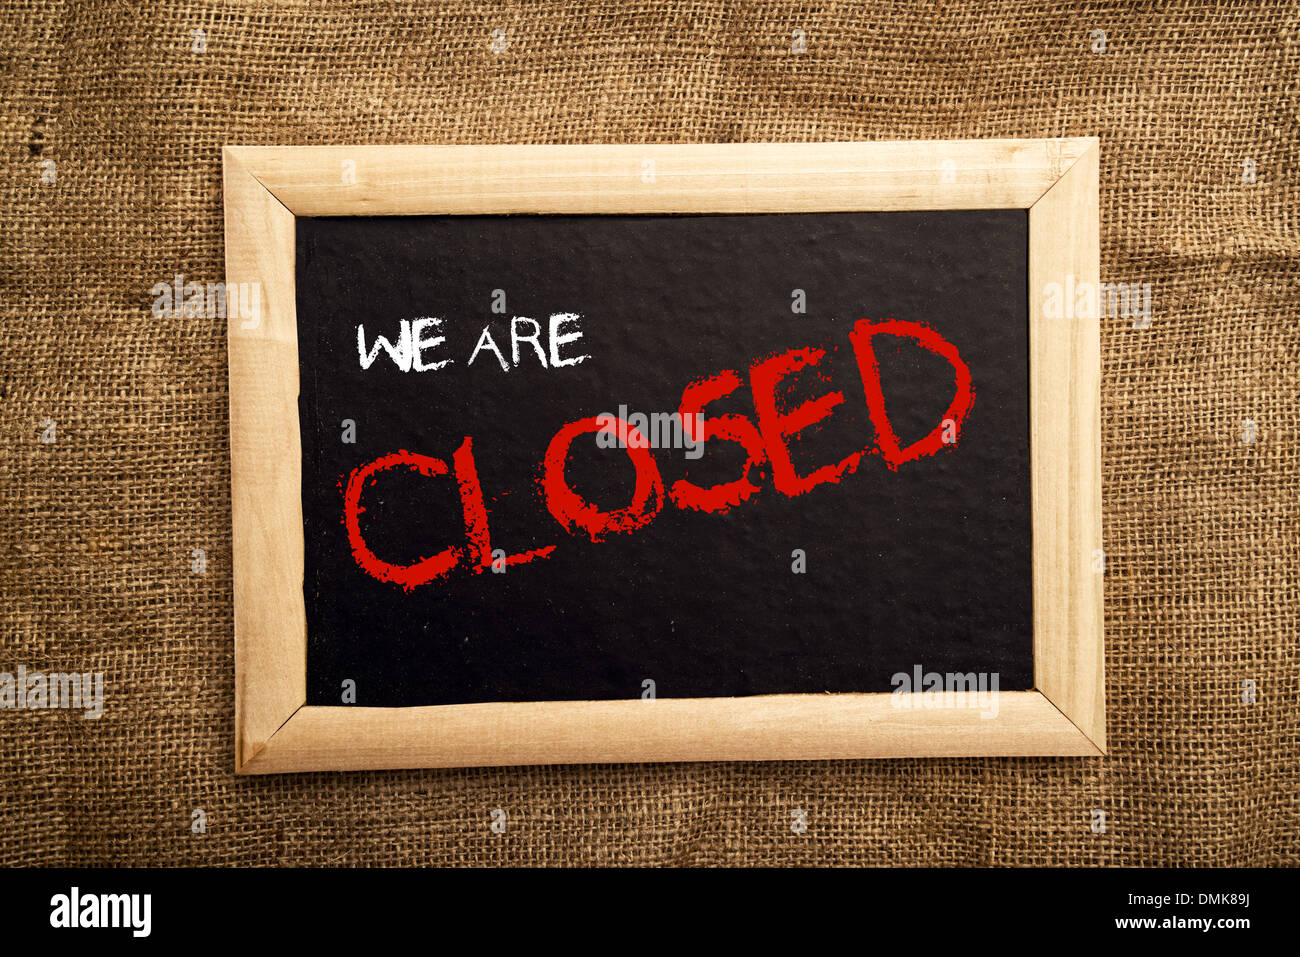 We are closed note on black message board Stock Photo